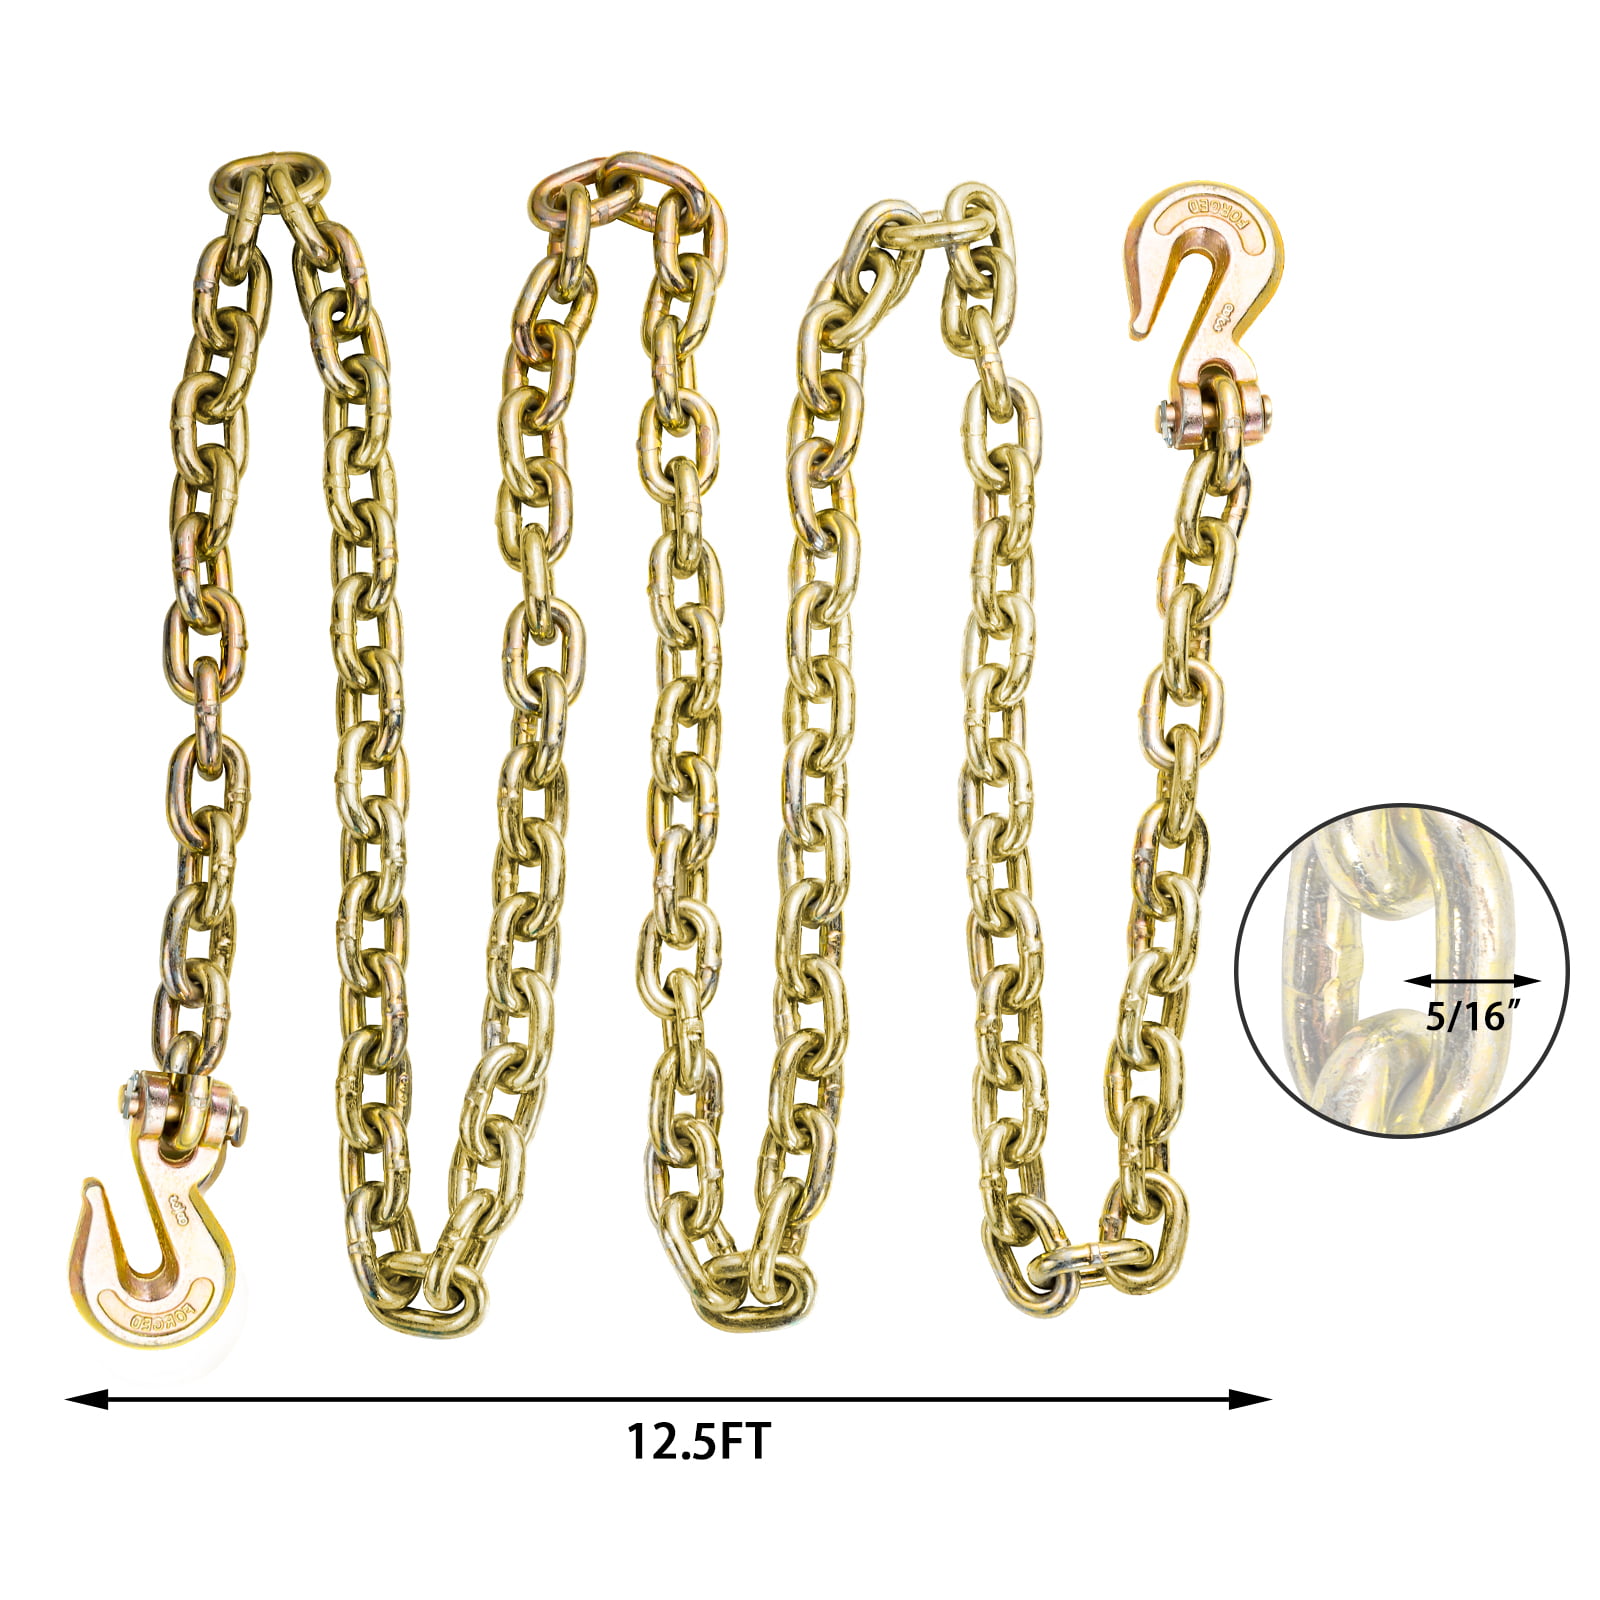 1/4" X 12ft H D Tow Chain With Hooks Towing Pulling Secure Truck Cargo Chains 